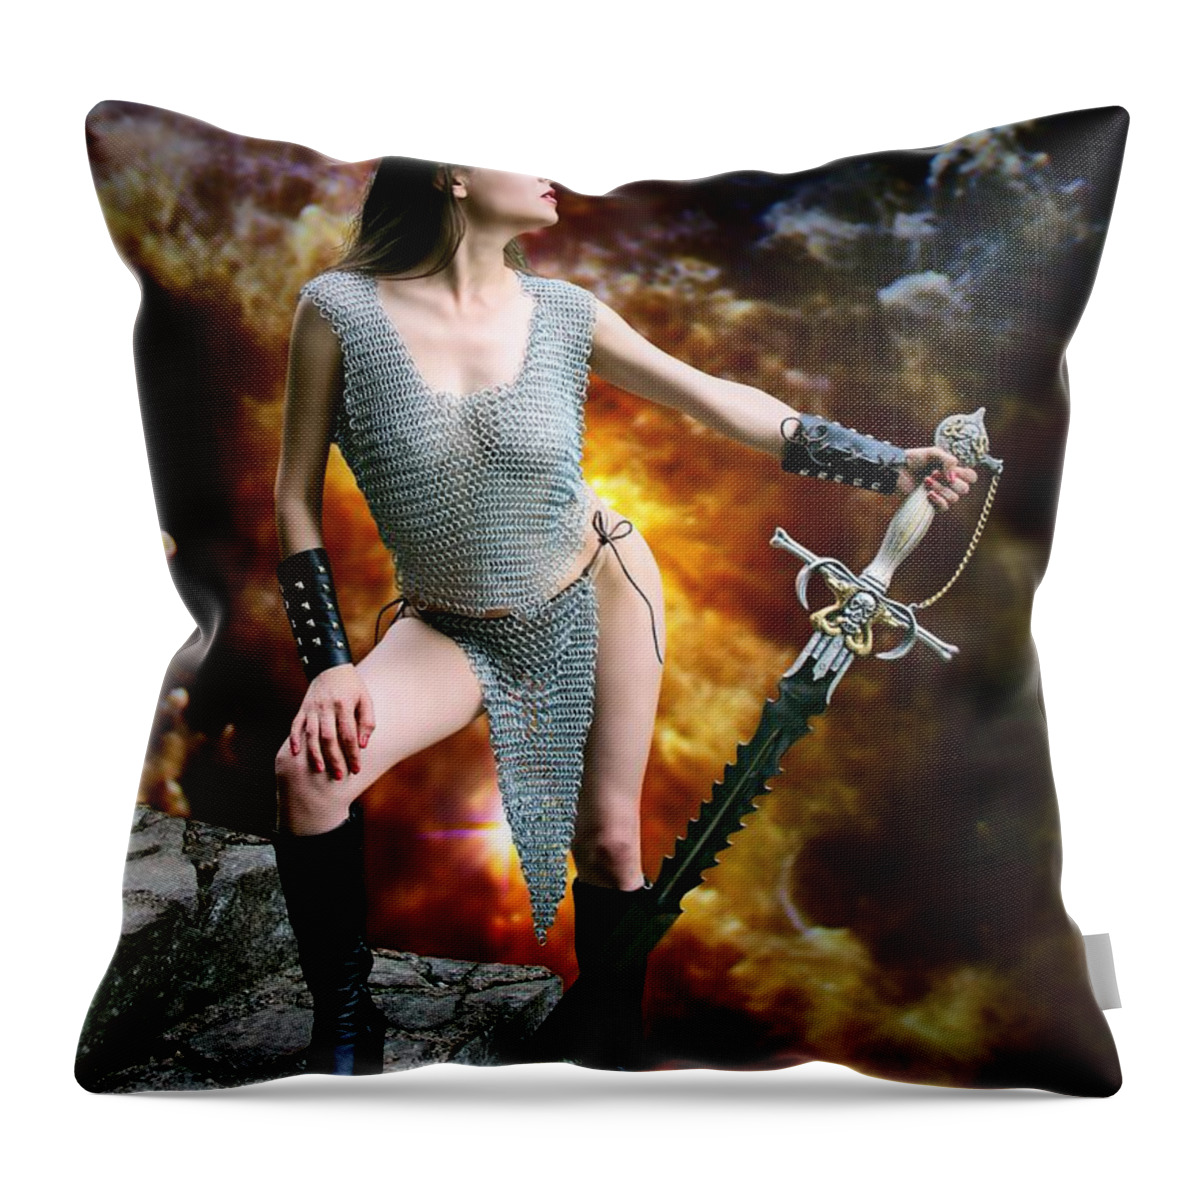 Fantasy Throw Pillow featuring the photograph The Fires Of Mt. Doom by Jon Volden